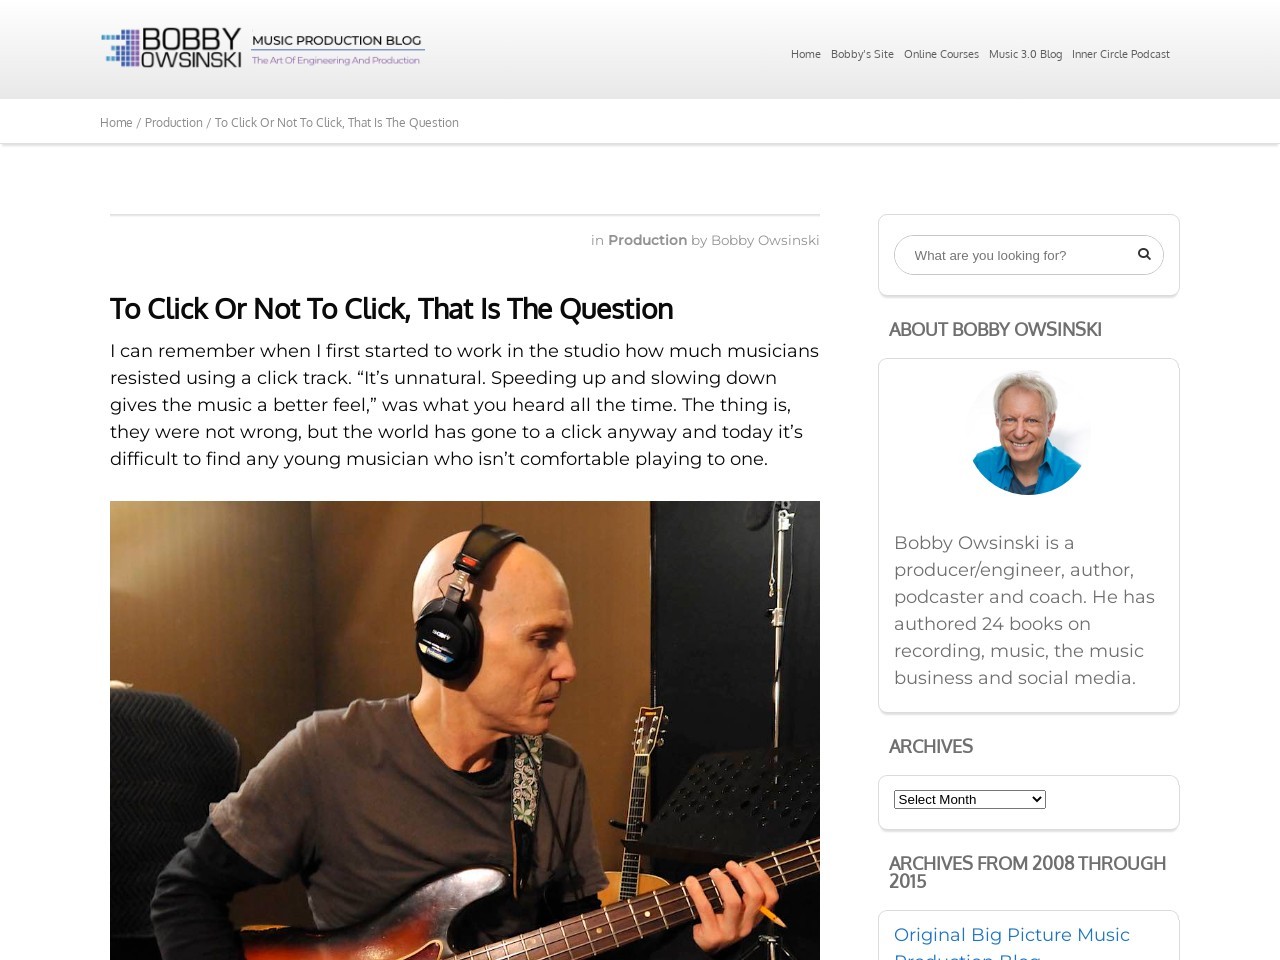 To Click Or Not To Click, That Is The Question - Bobby Owsinski's Music Production Blog